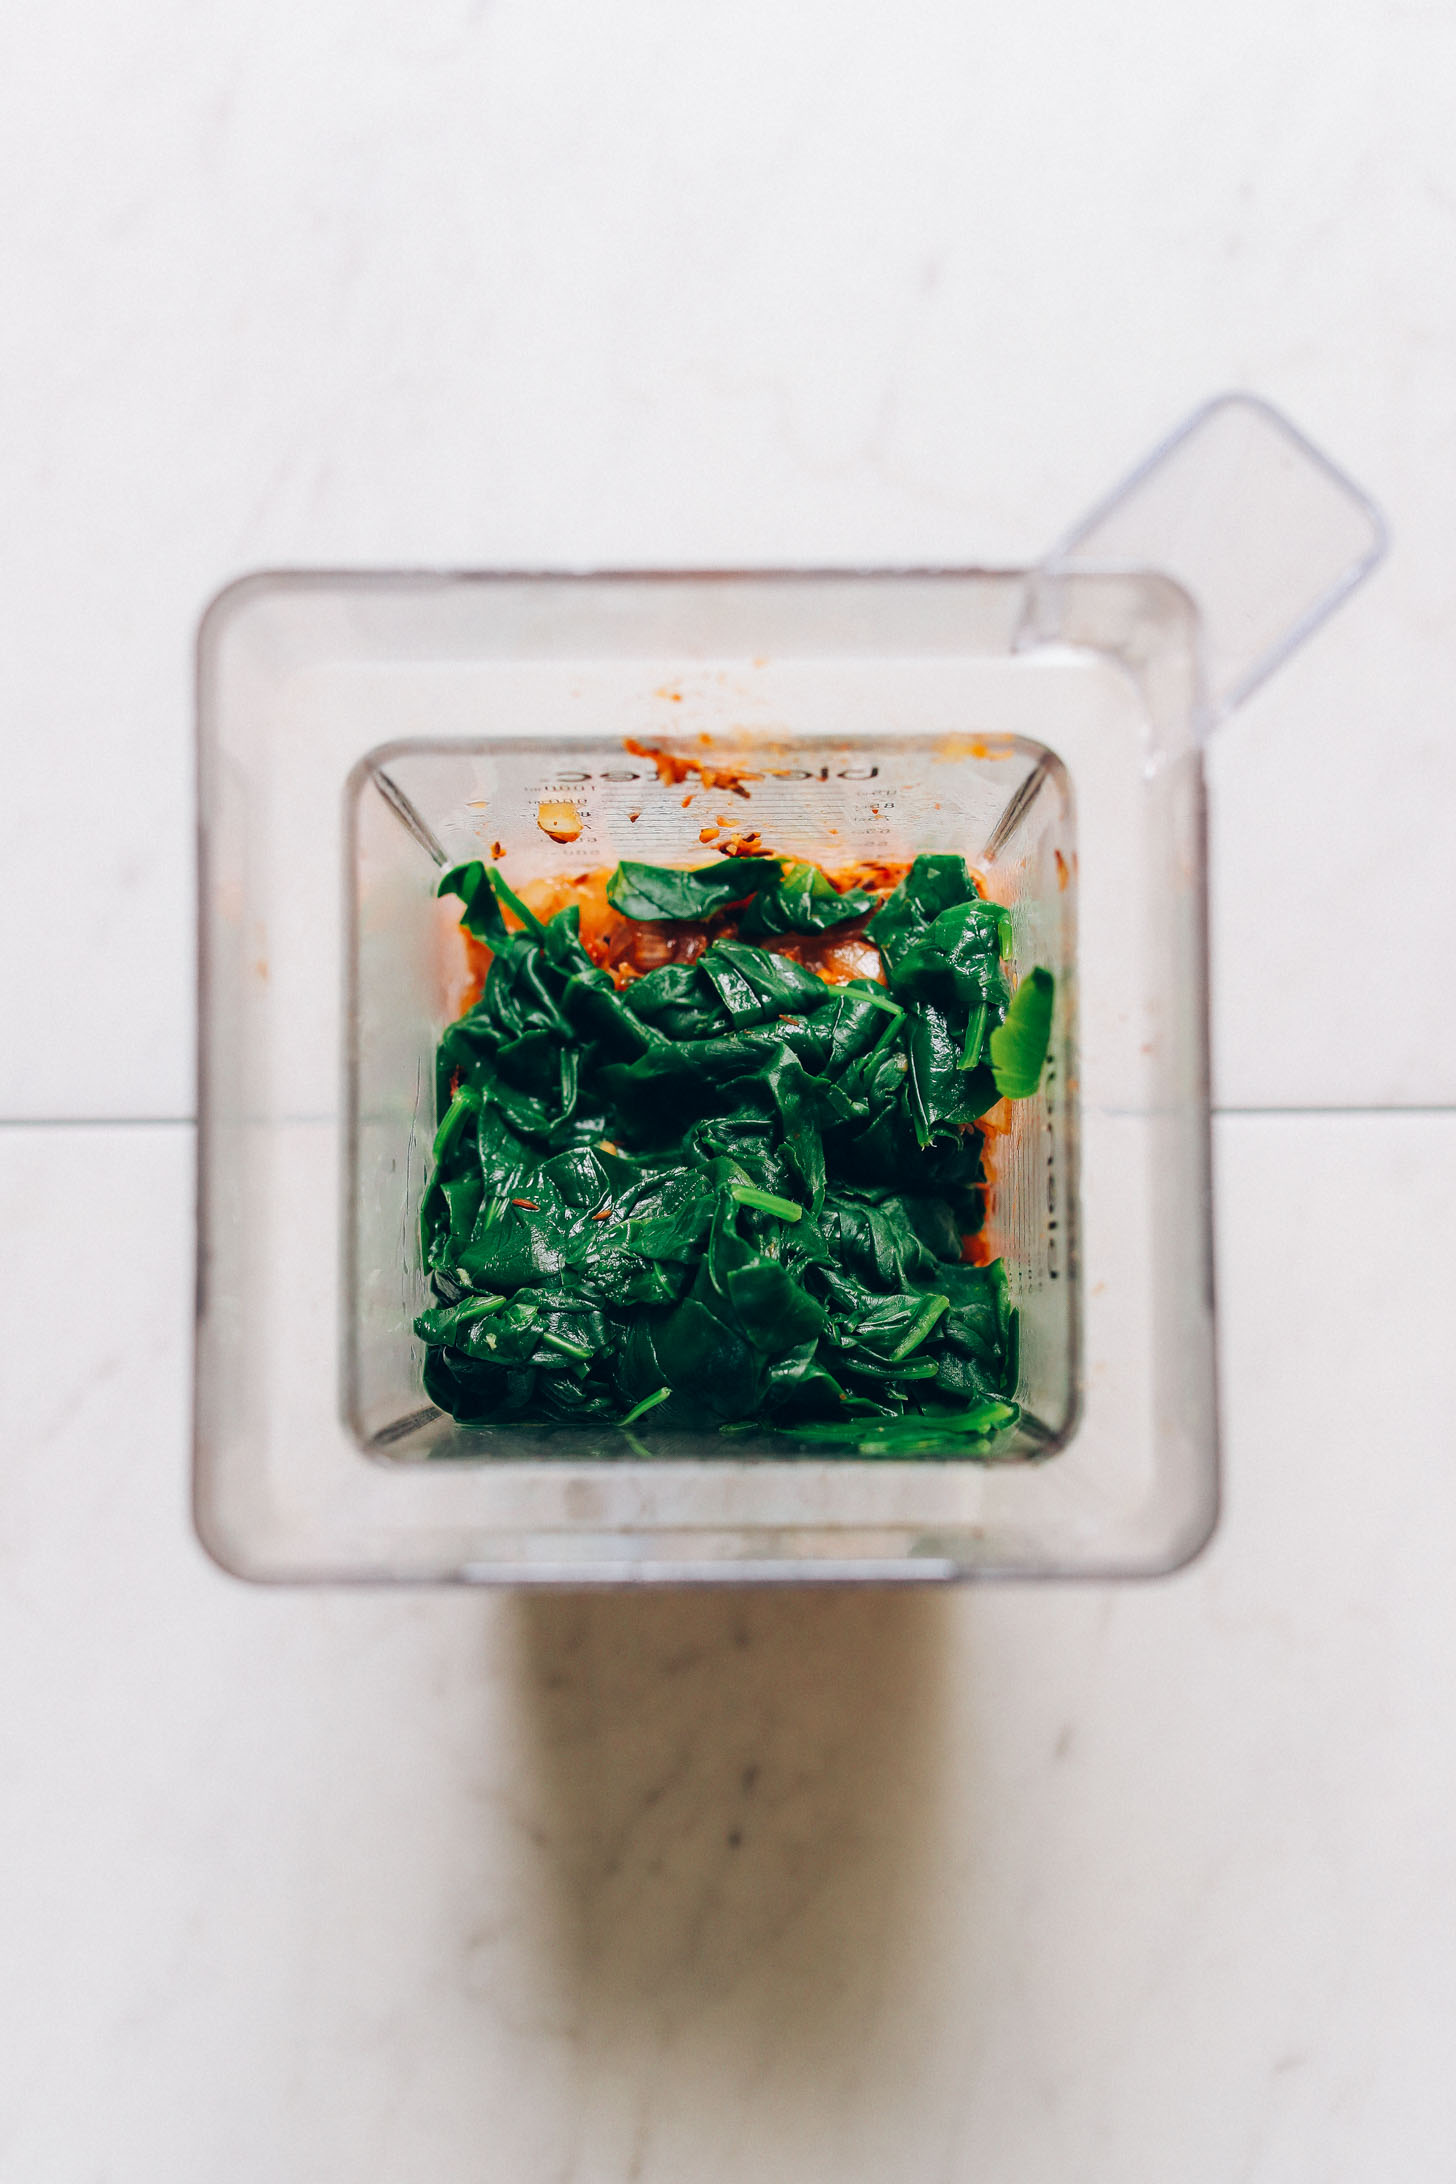 Overhead image of a blender with palak paneer ingredients and steamed spinach on top